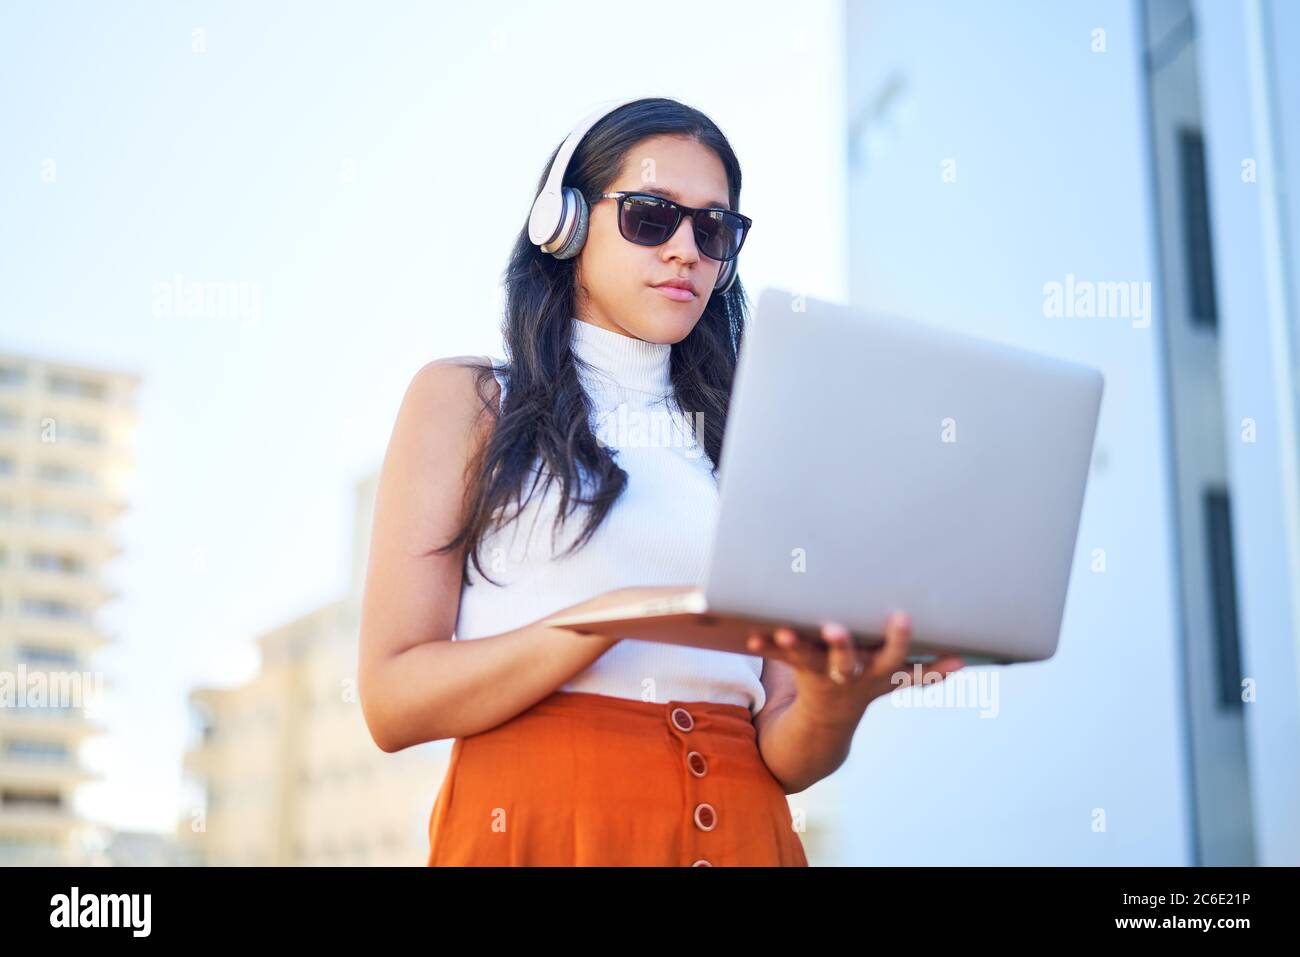 Young woman with headphones using laptop on urban balcony Stock Photo